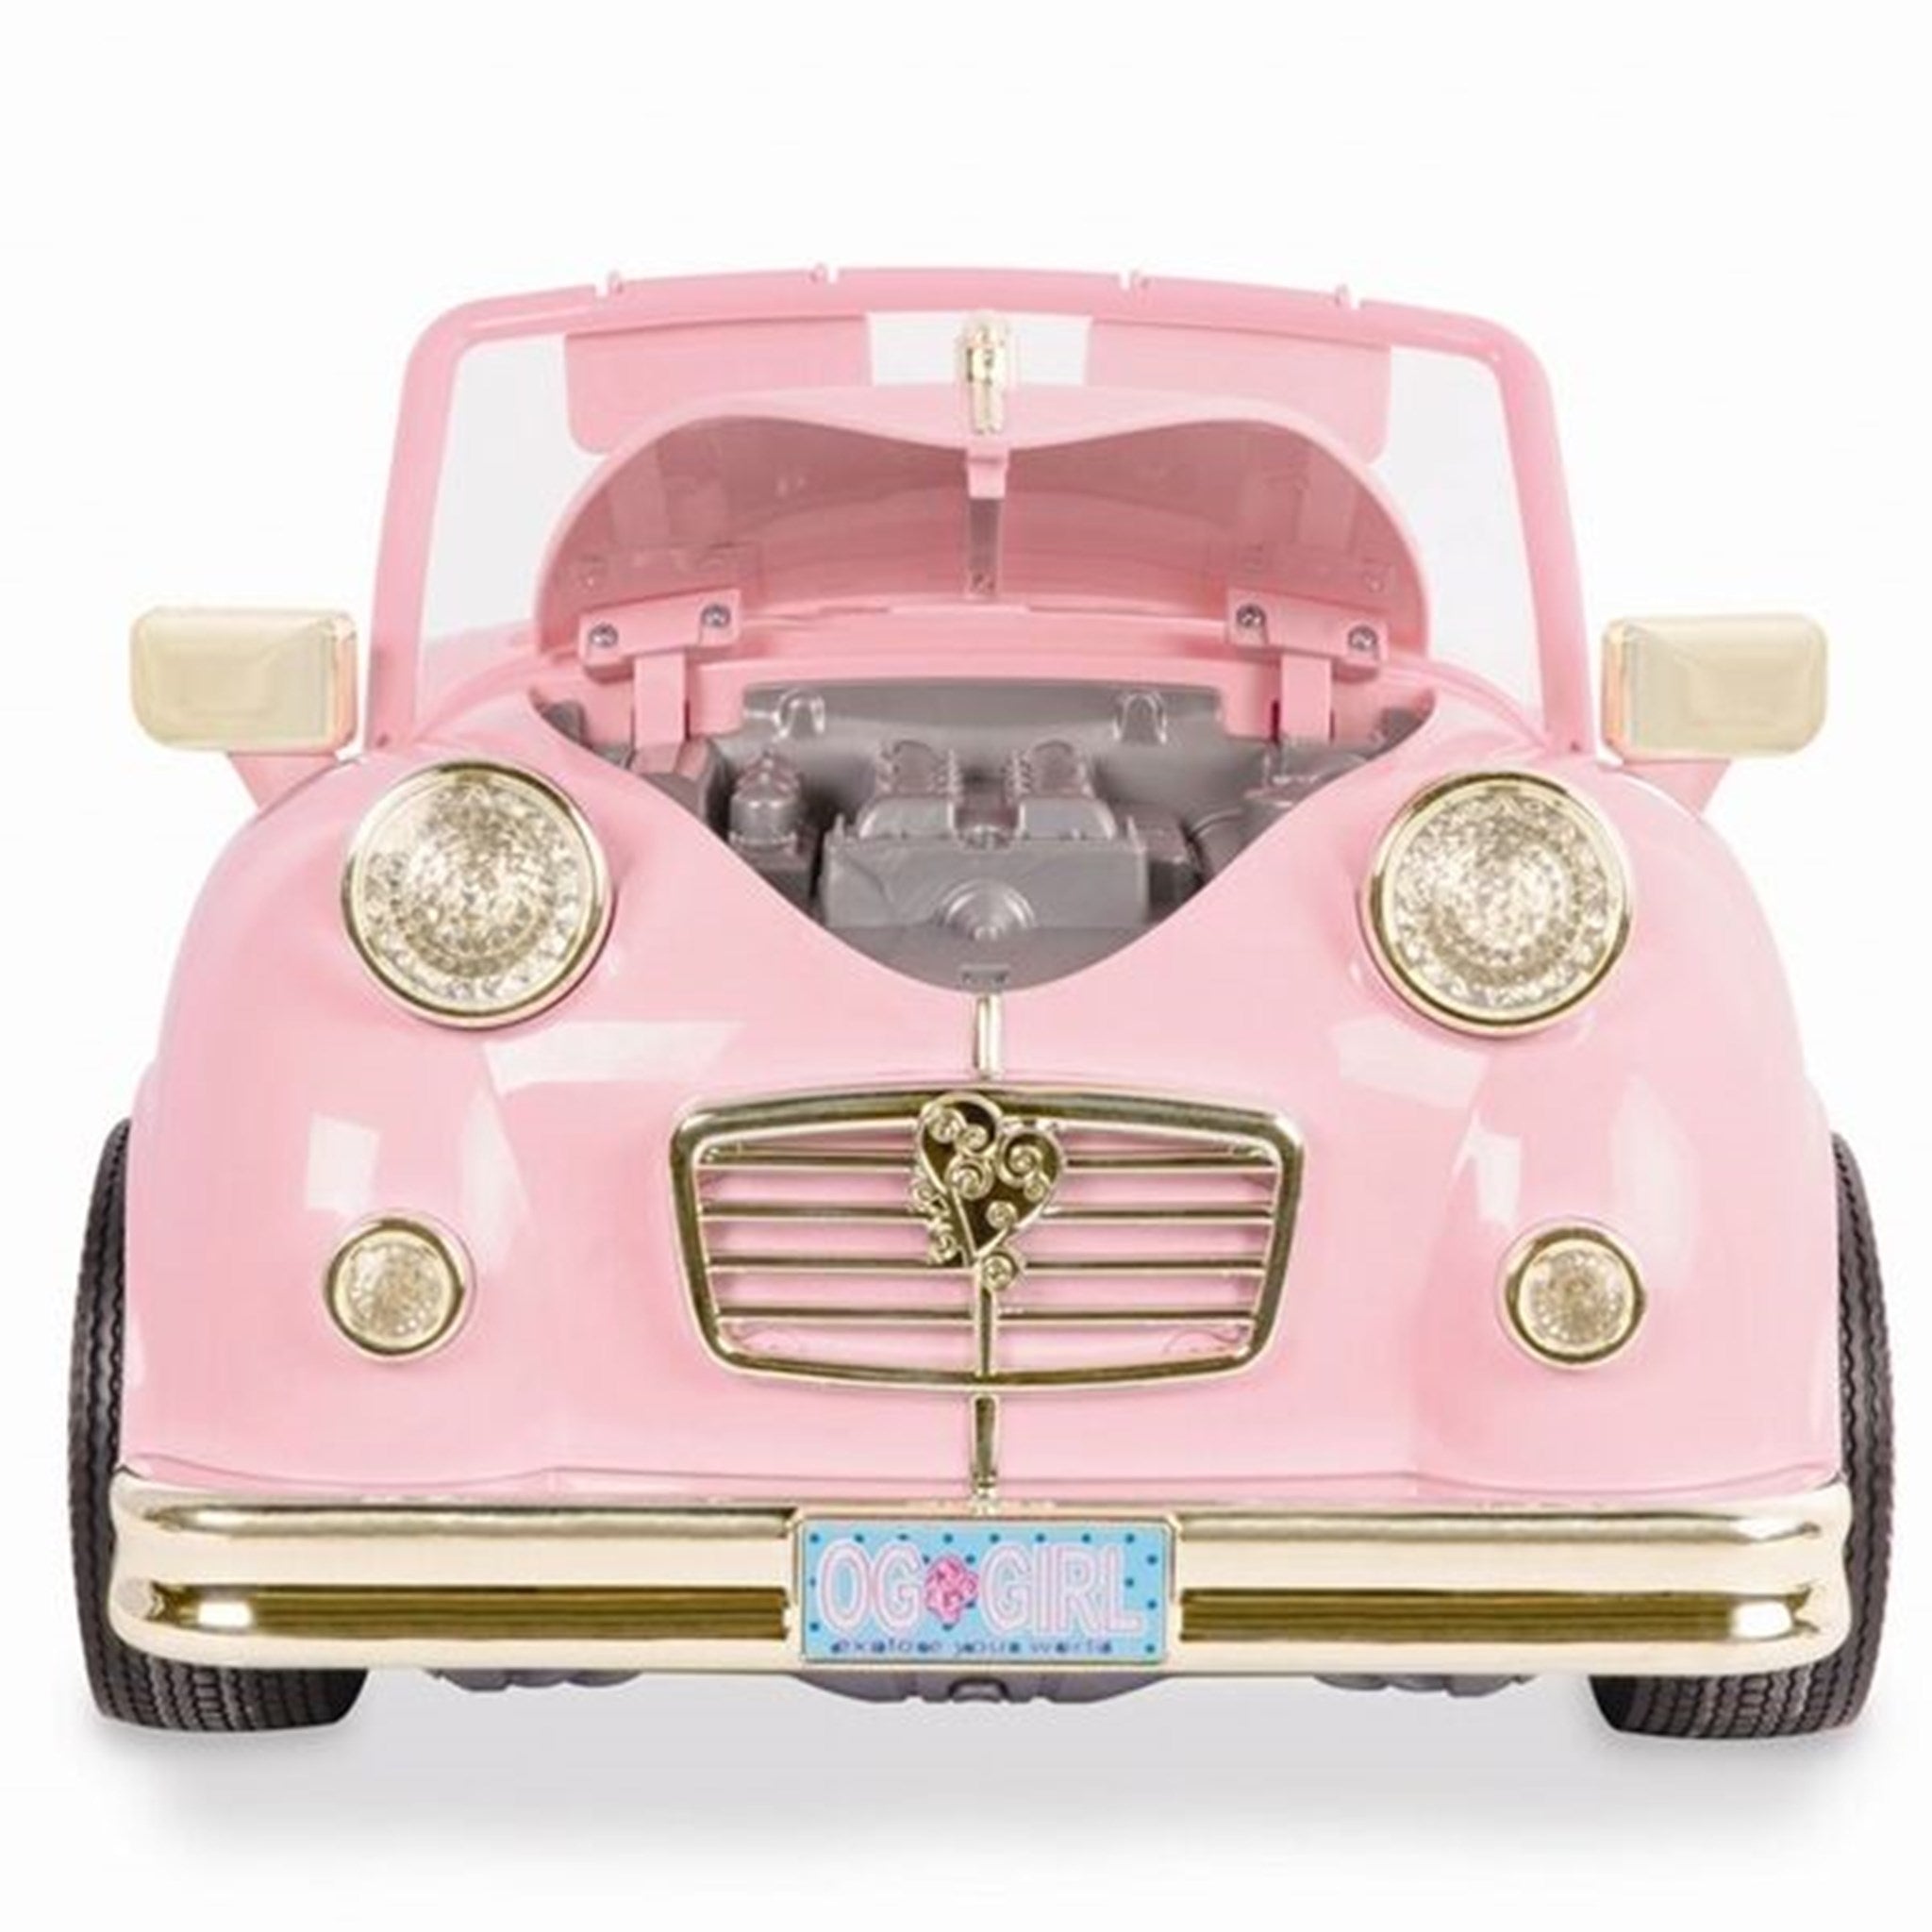 Our Generation Retro Car Pink 2